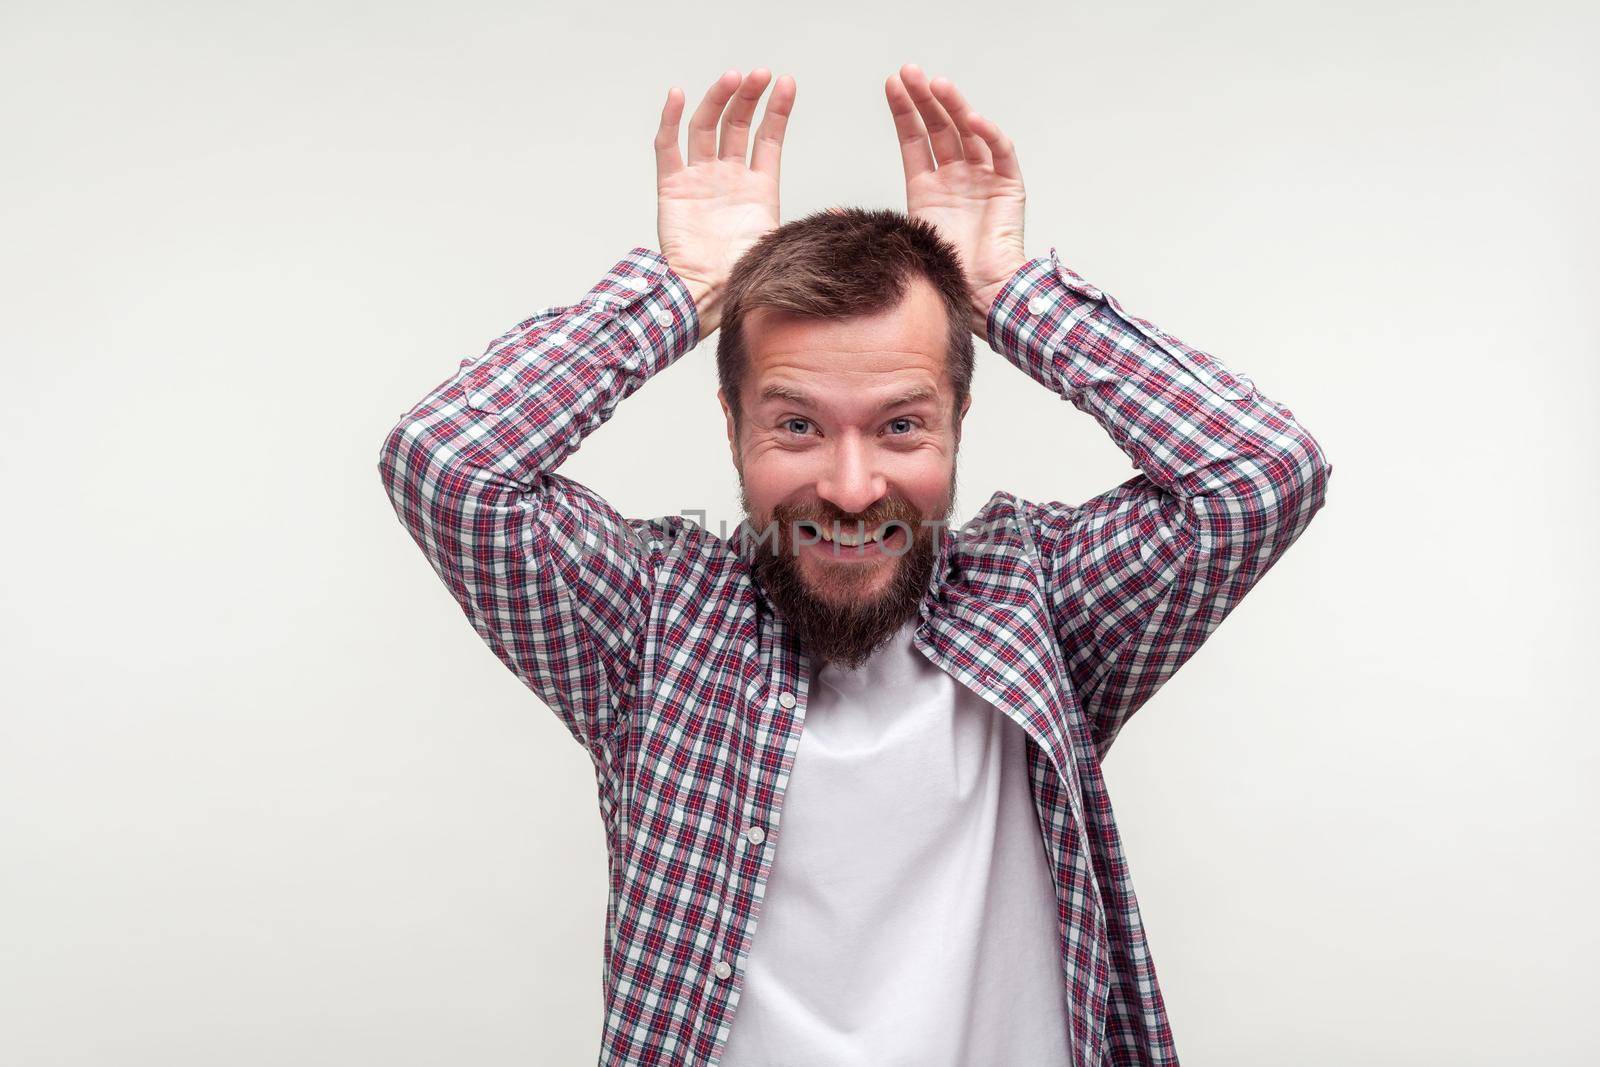 Portrait of funny happy bearded man in plaid shirt making bunny ears gesture, smiling joyfully at camera and feeling childish carefree, optimistic view. indoor studio shot isolated on white background